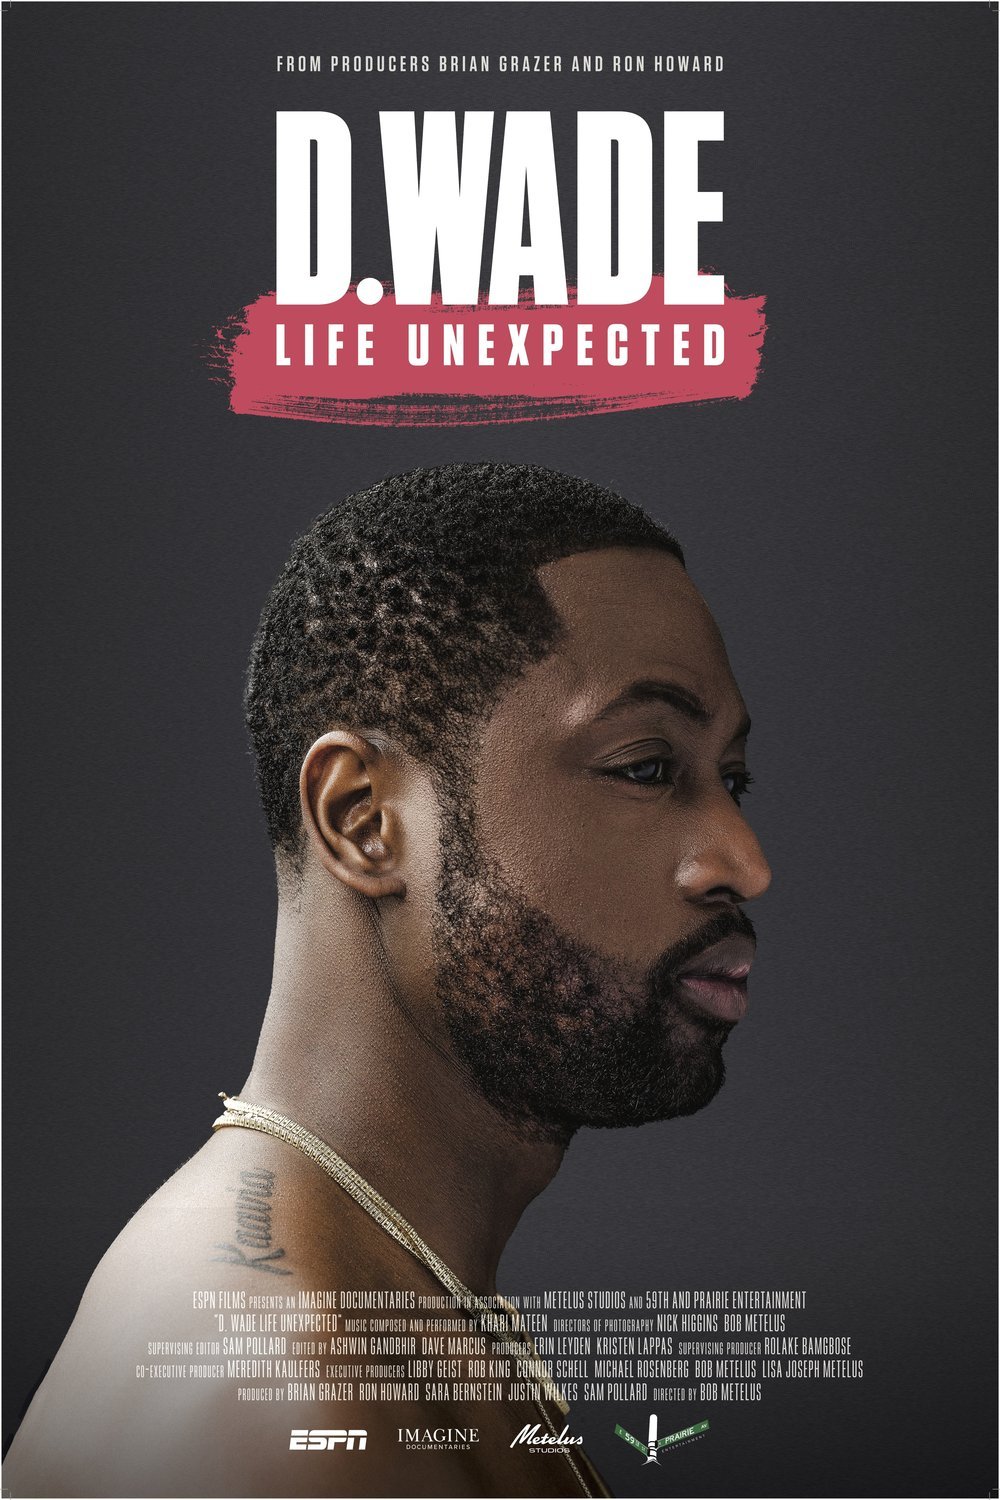 Poster of the movie D. Wade Life Unexpected